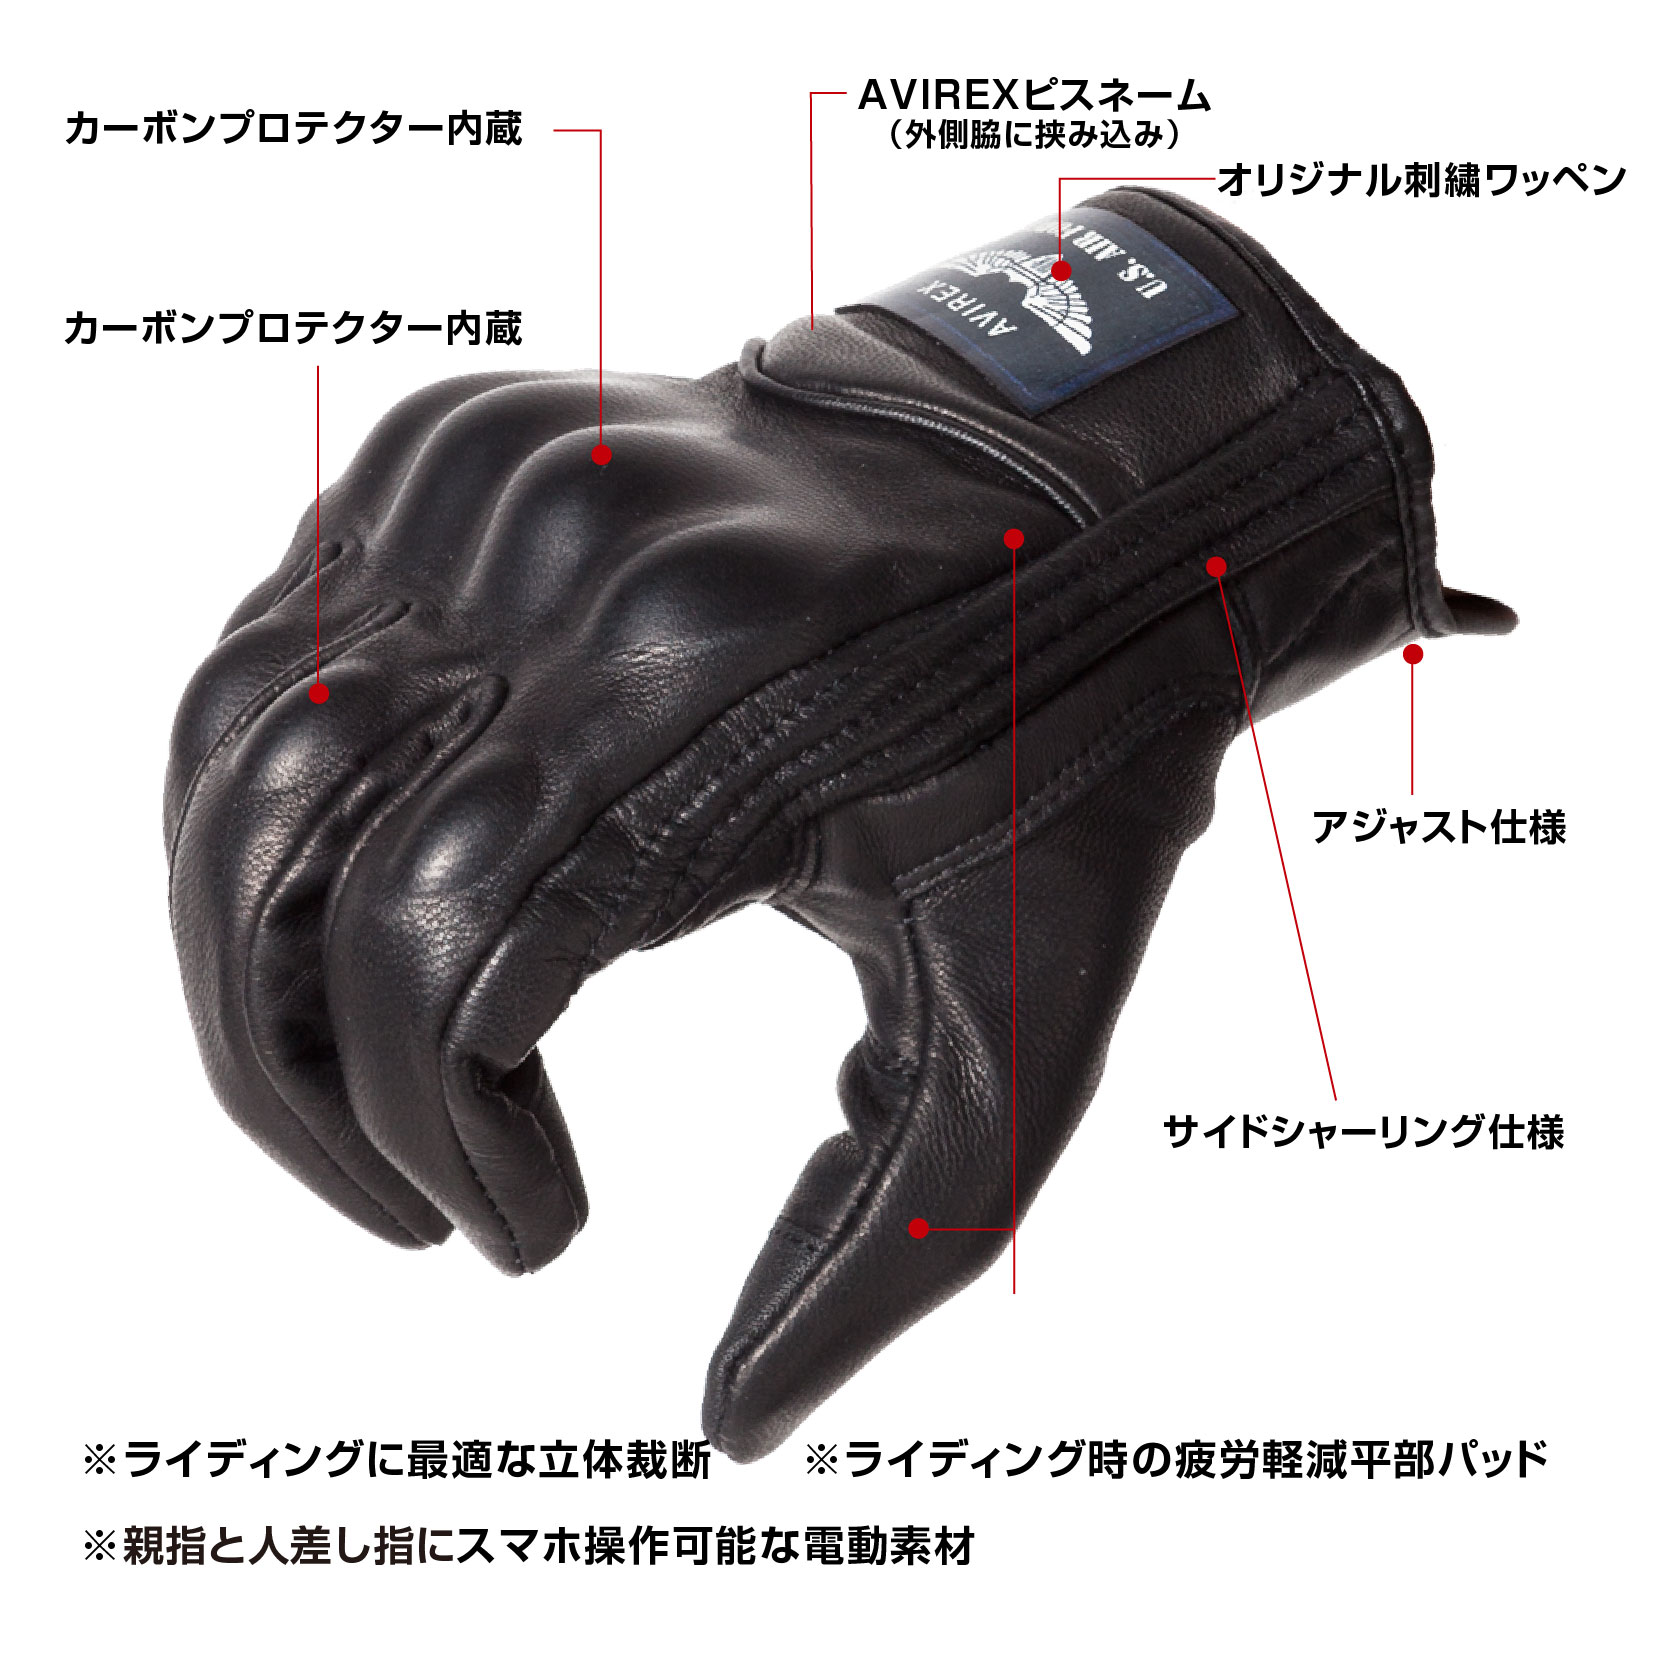 A1T6003 AVIREX PROTECT LEATHER GLOVE アヴィレックス カーボン